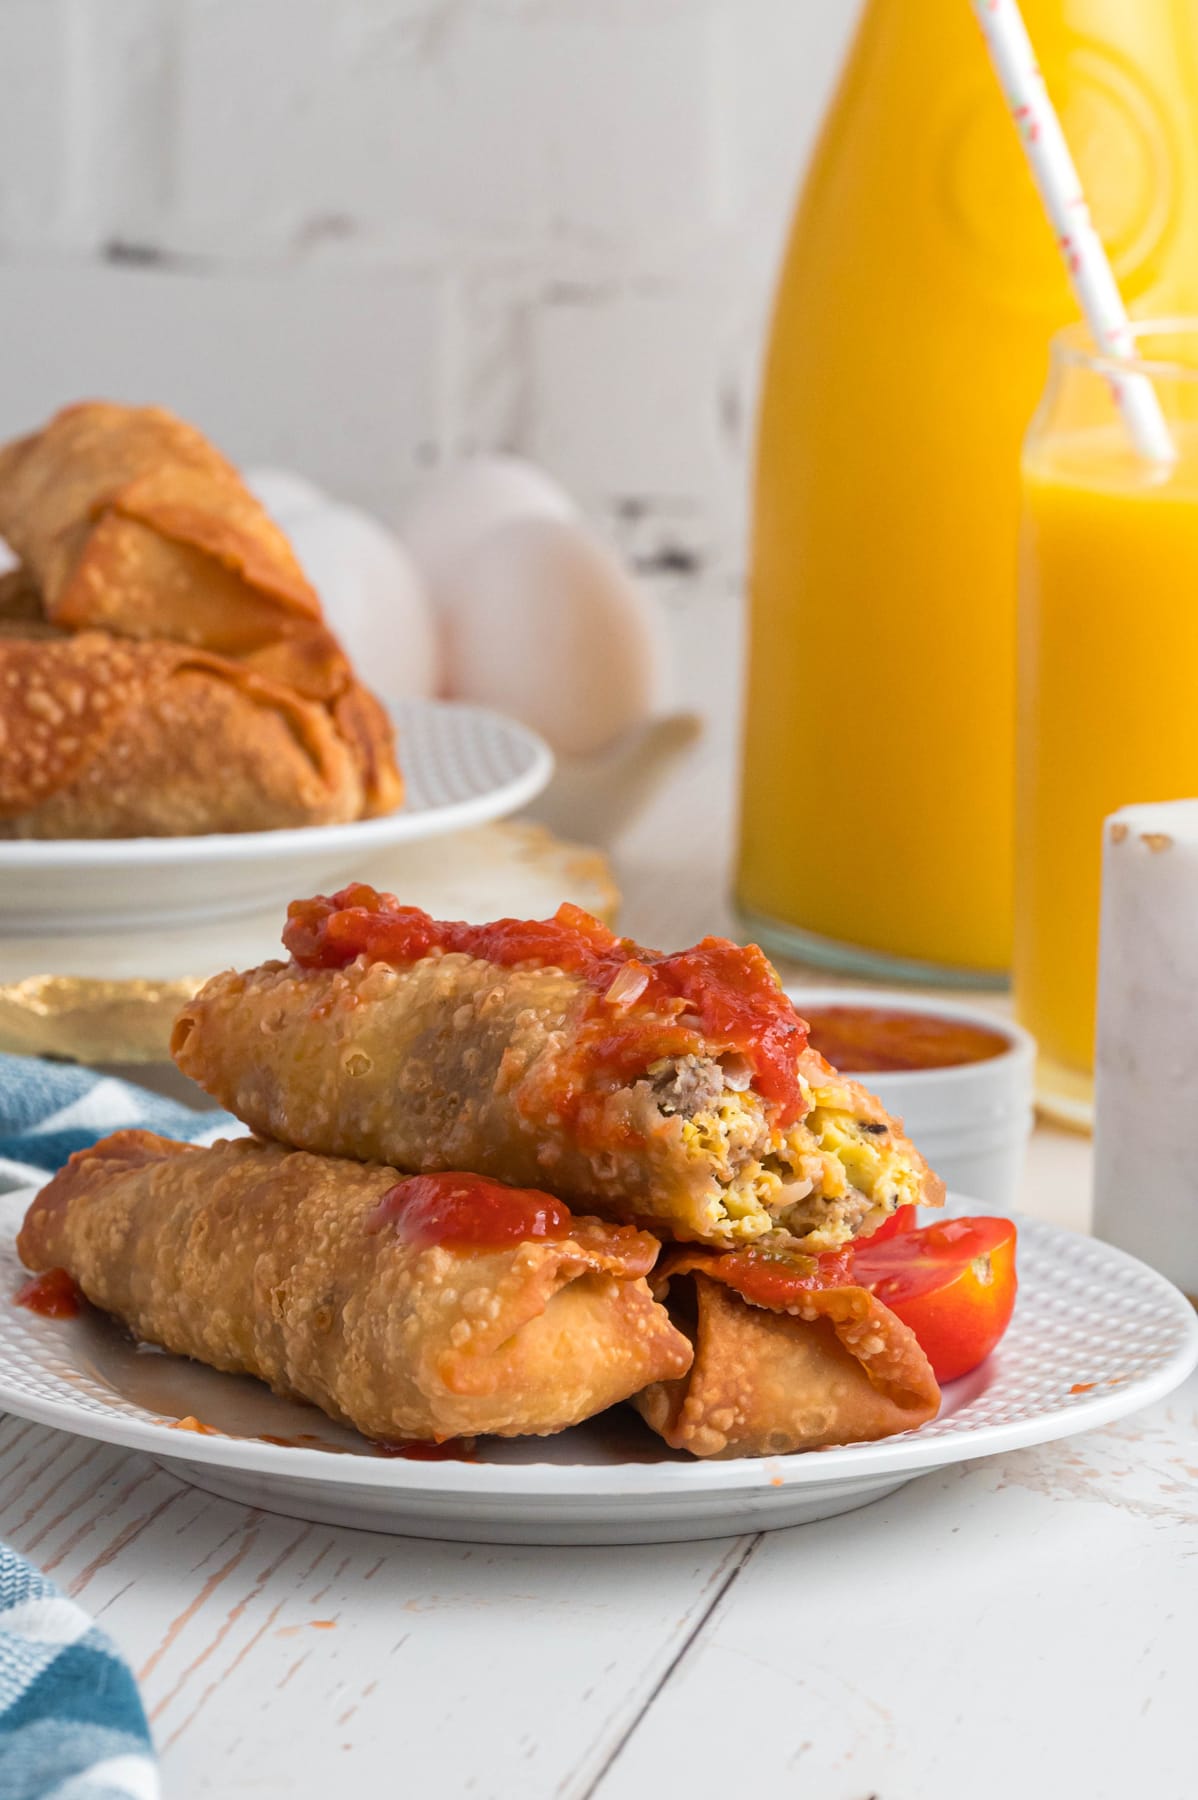 Breakfast egg rolls with salsa on a plate with orange juice.